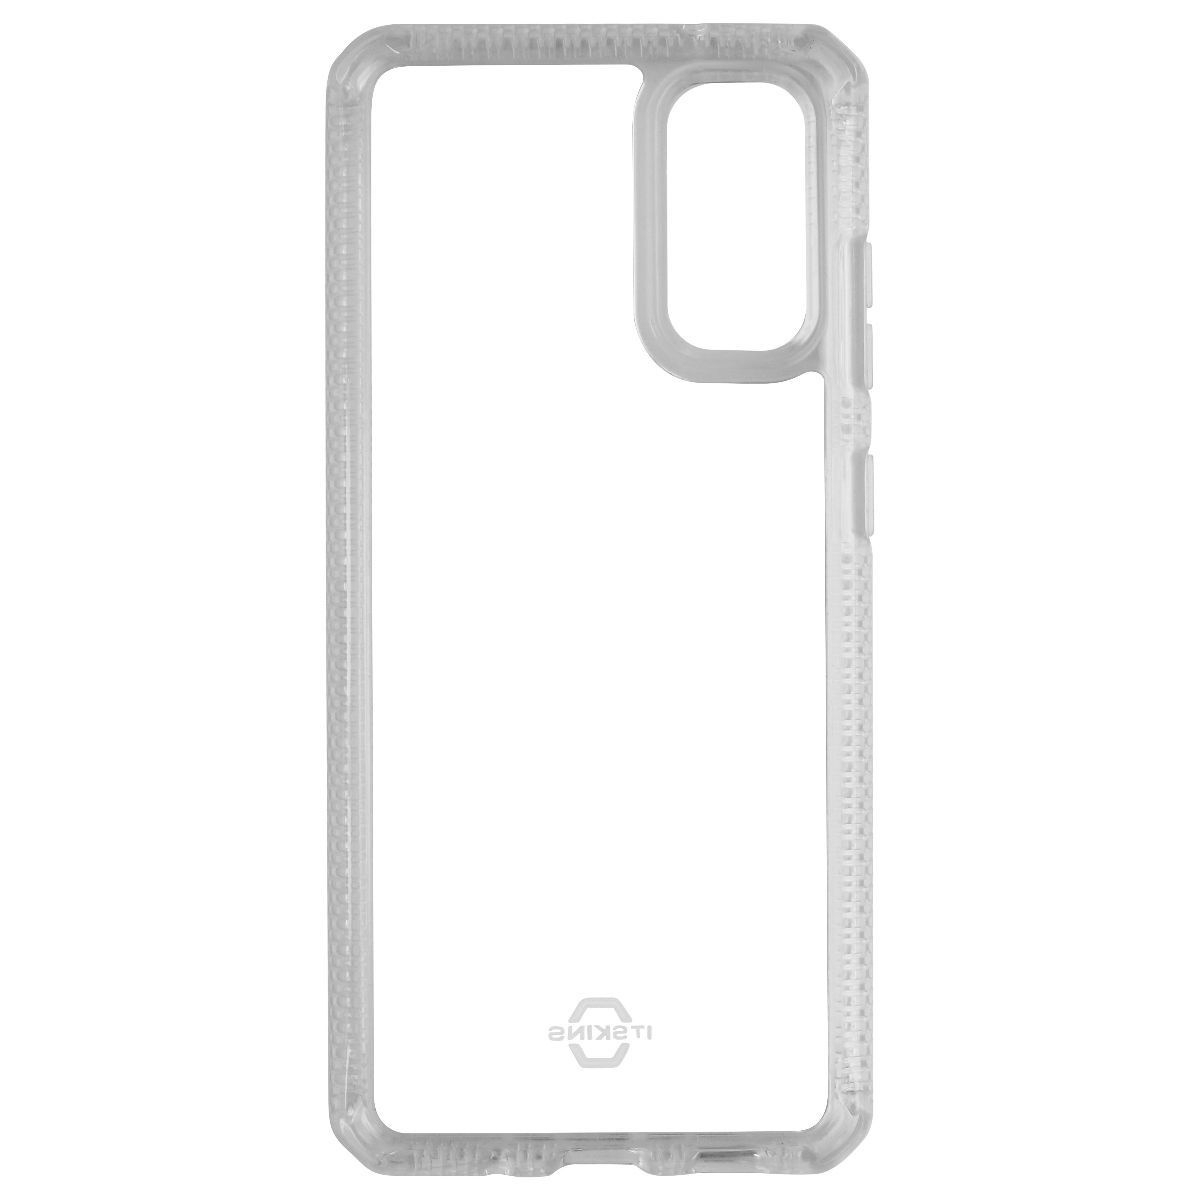 ITSKINS Hybrid Clear Series Case For Samsung Galaxy S20 - Transparent